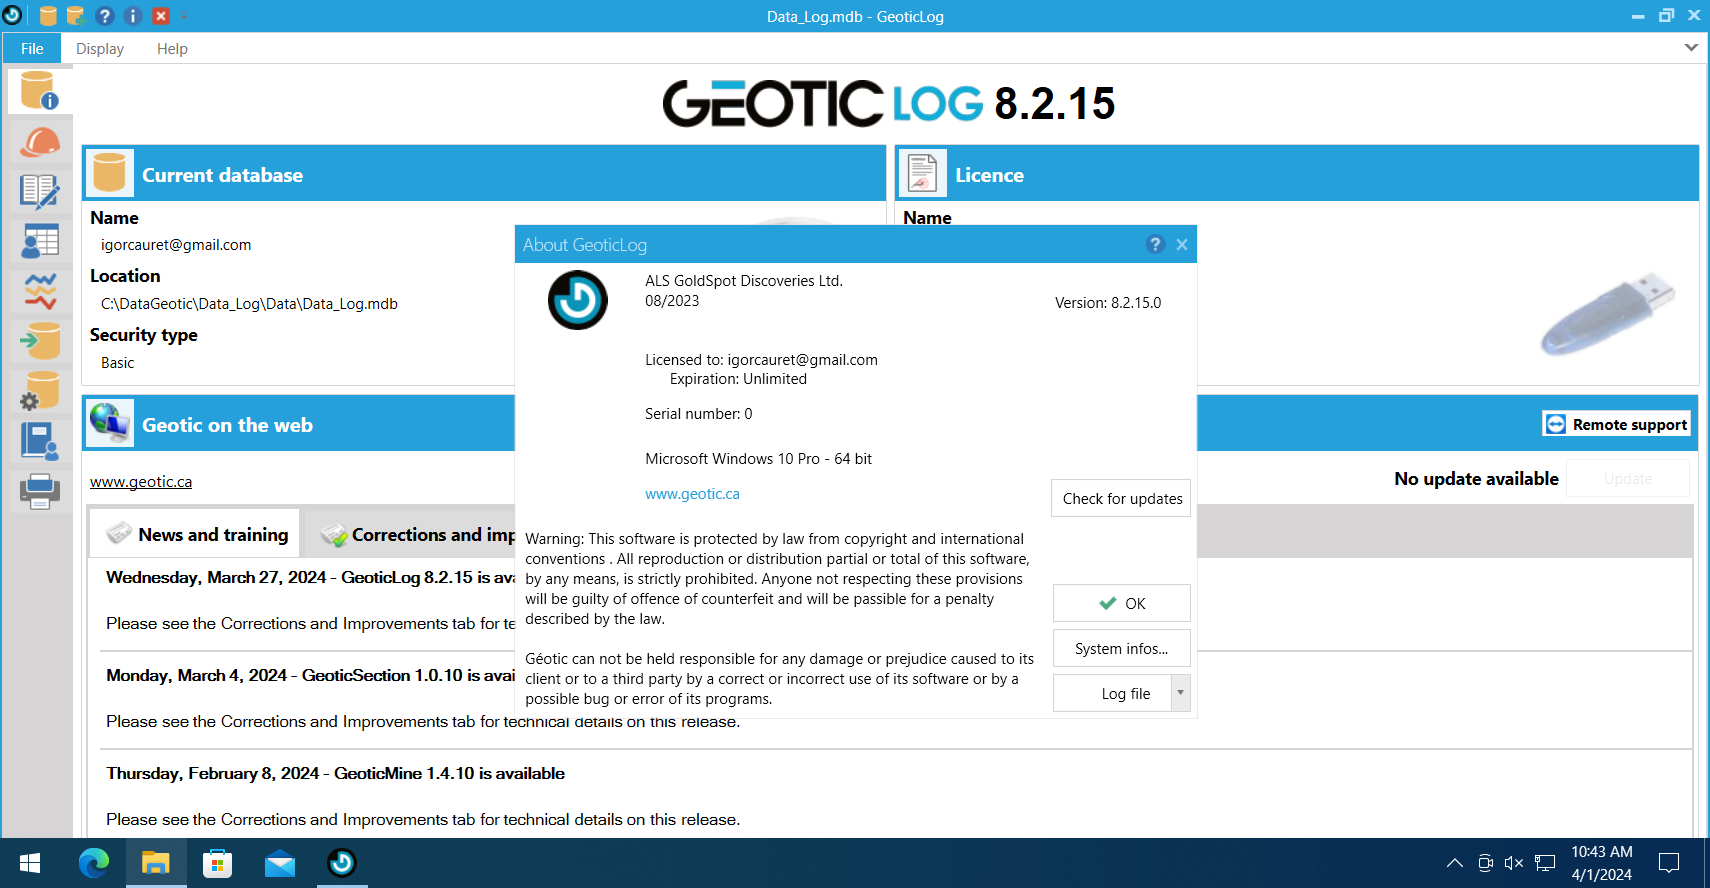 Working with GeoticLog 8.2.15 full license